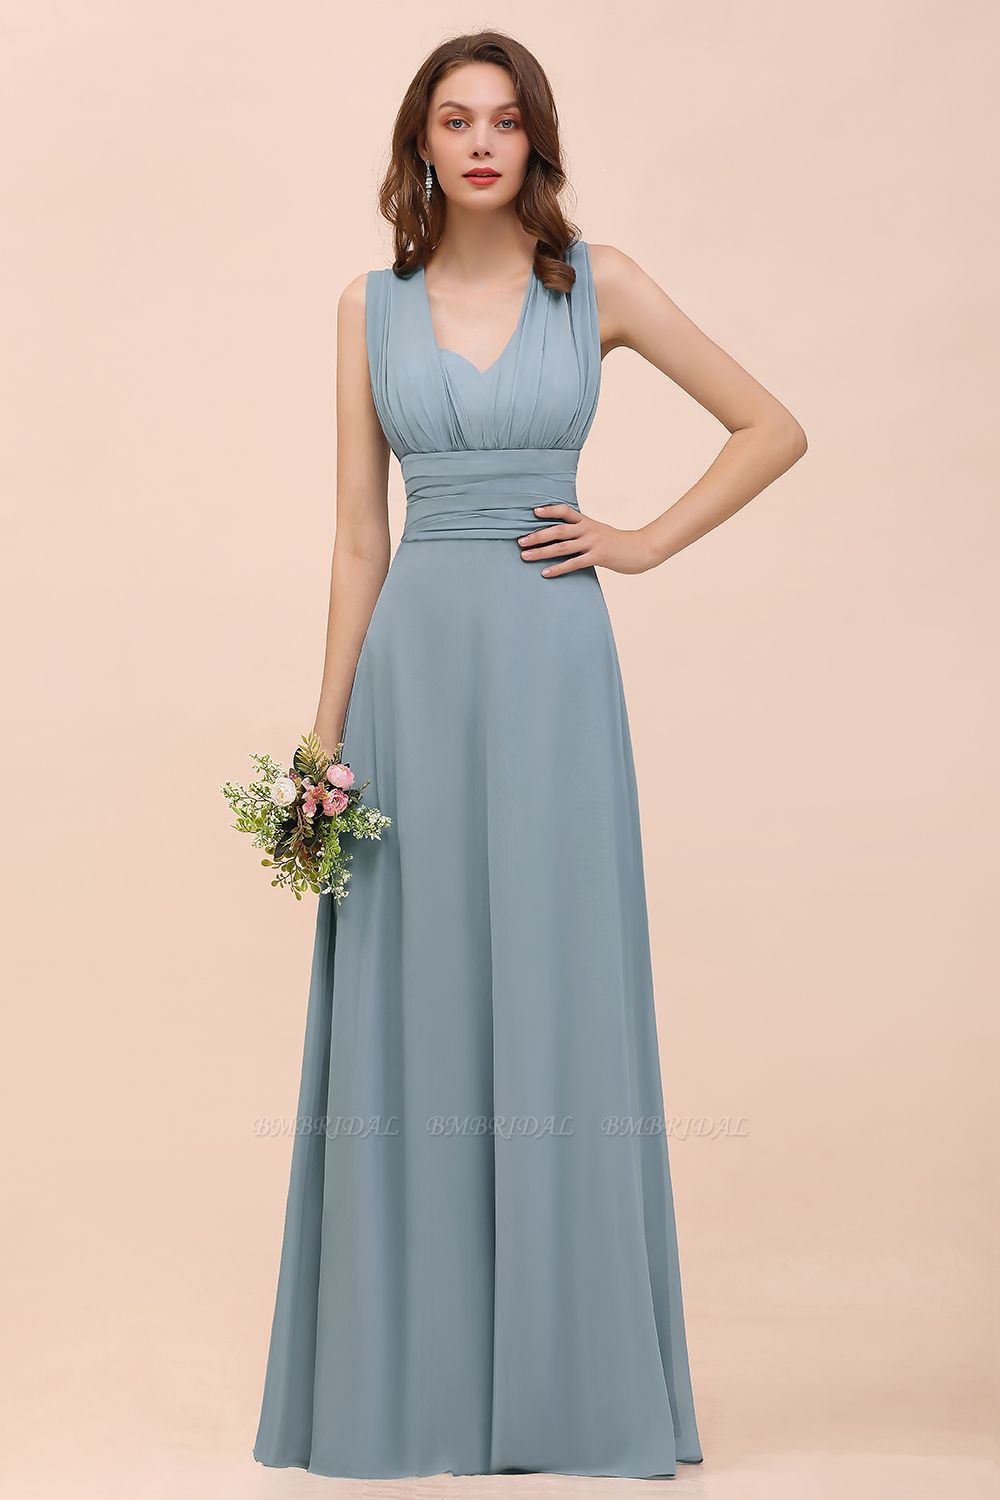 Try at Home Sample Bridesmaid Dress Dusty Blue Burgundy